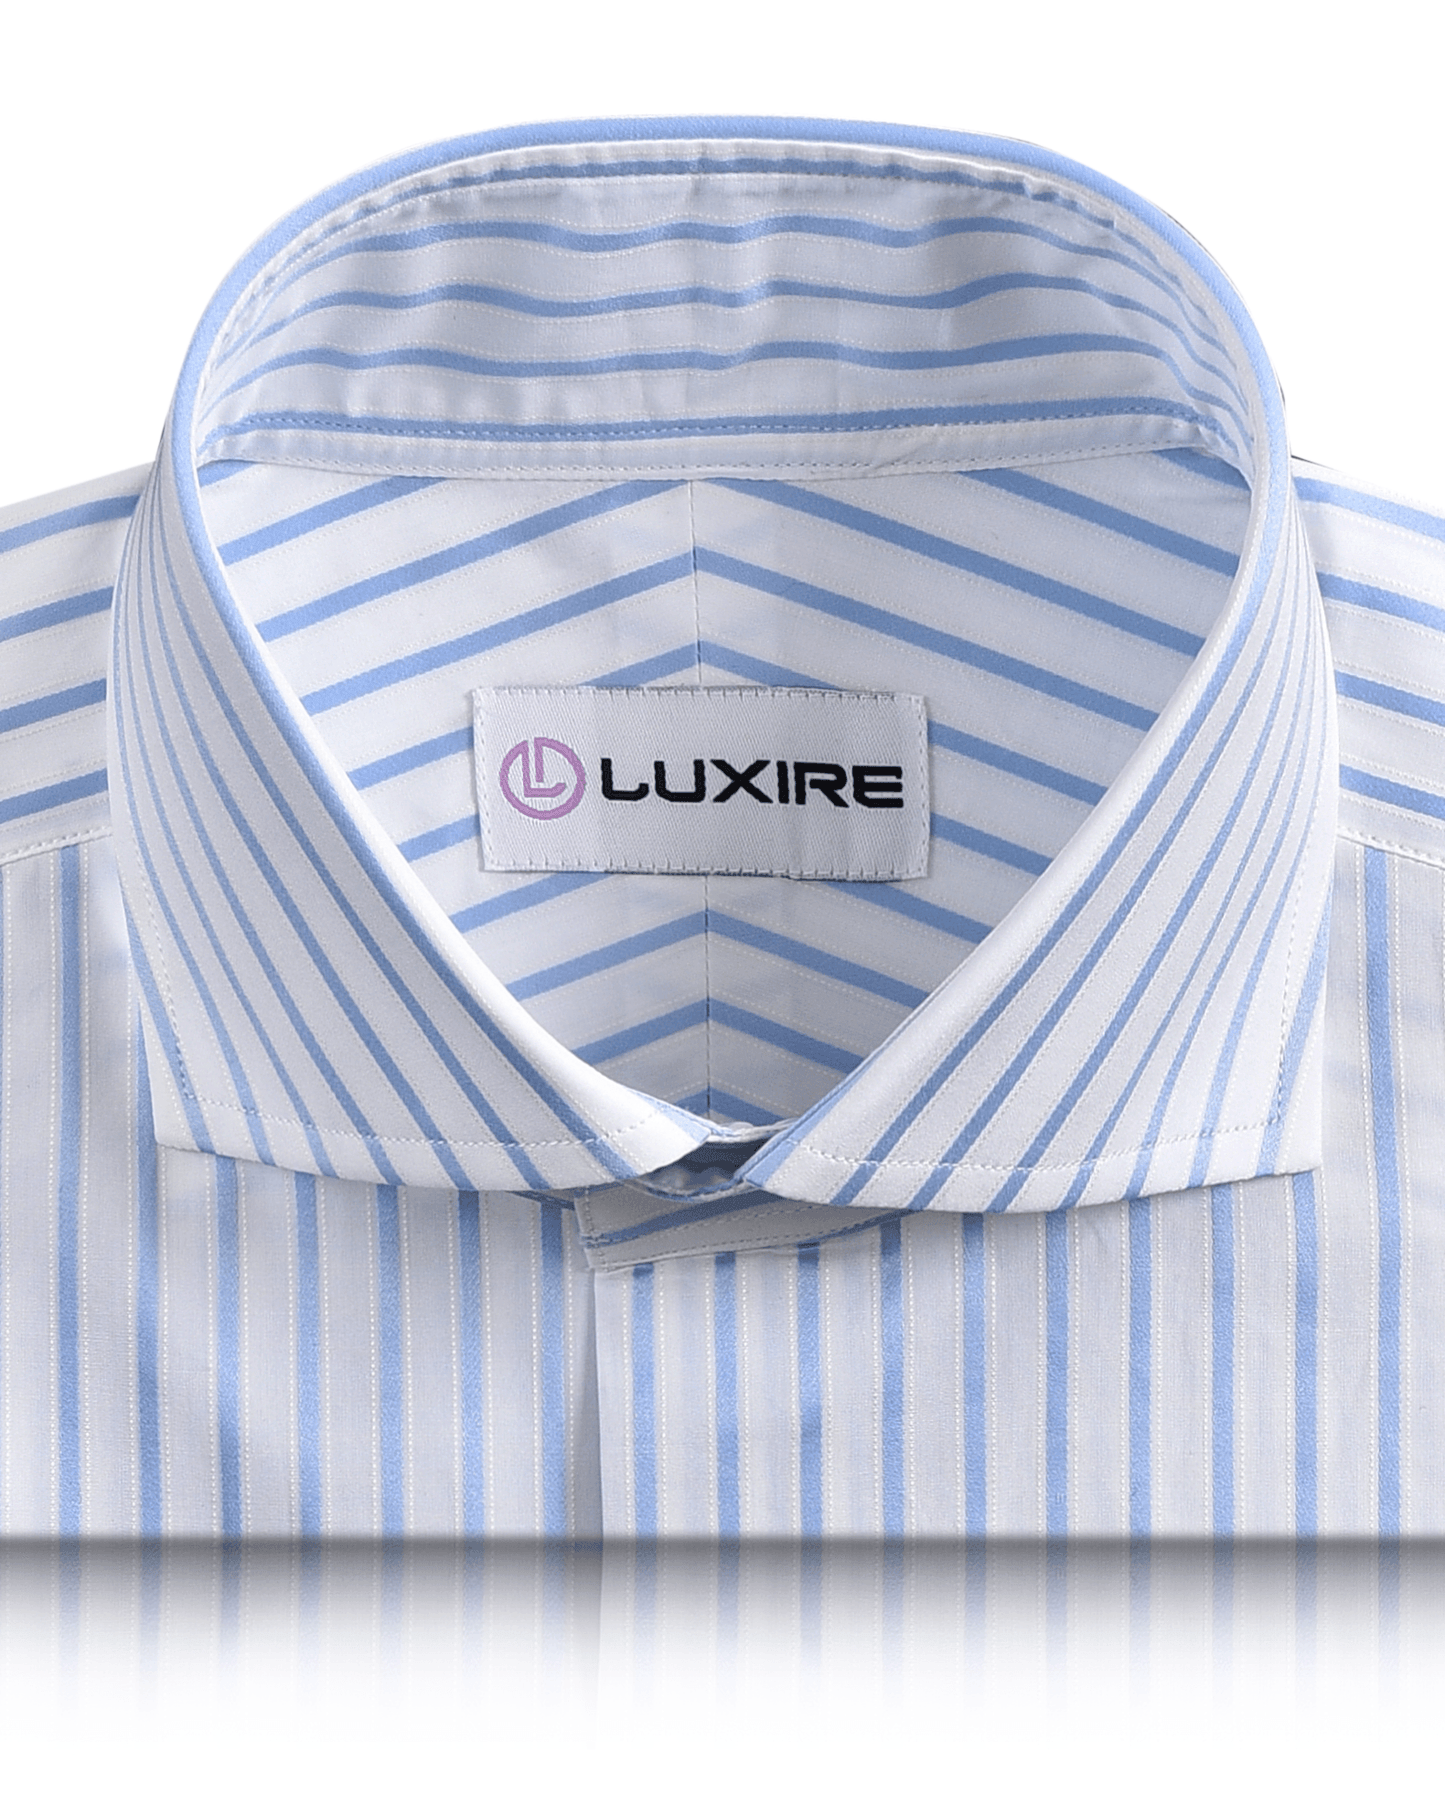 Luxire Gold - White with Blue Stripes Shirt